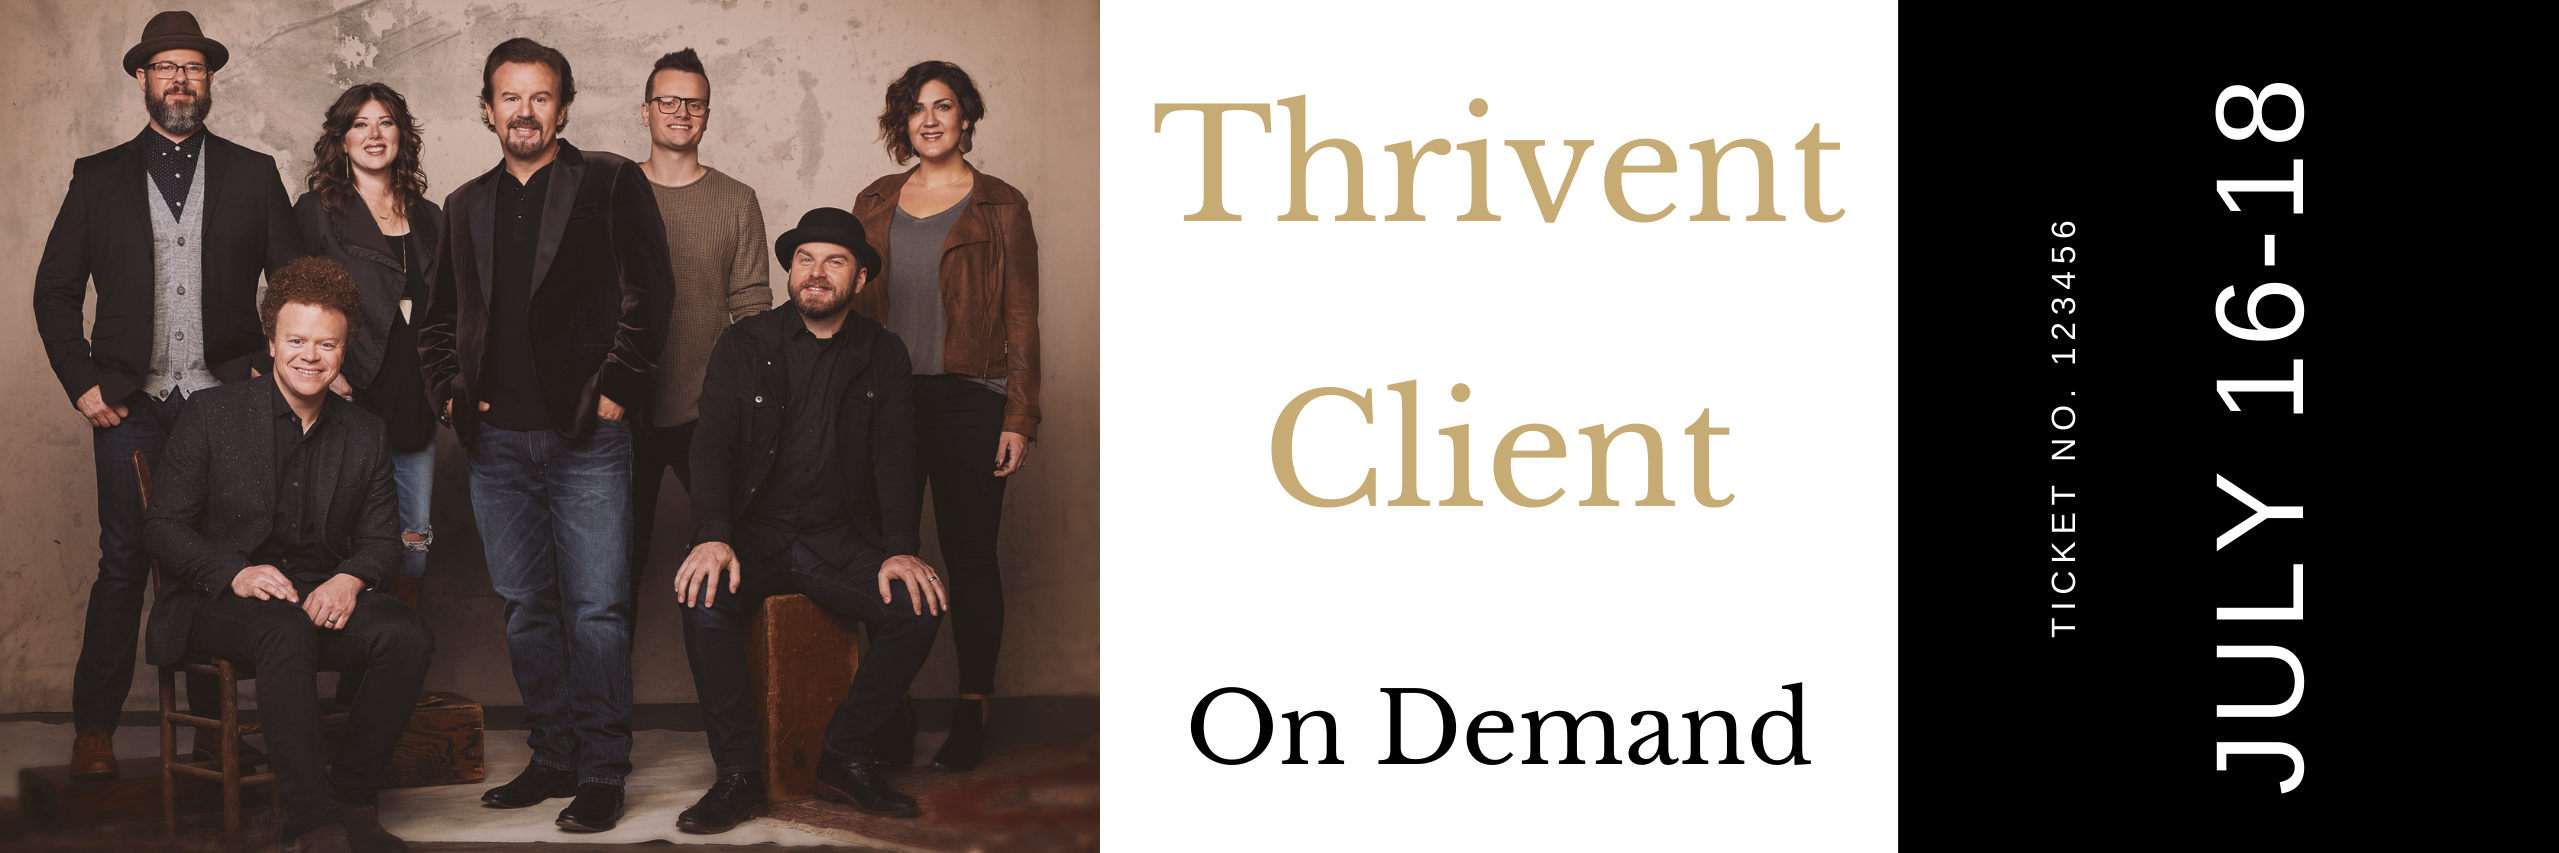 Thrivent Client